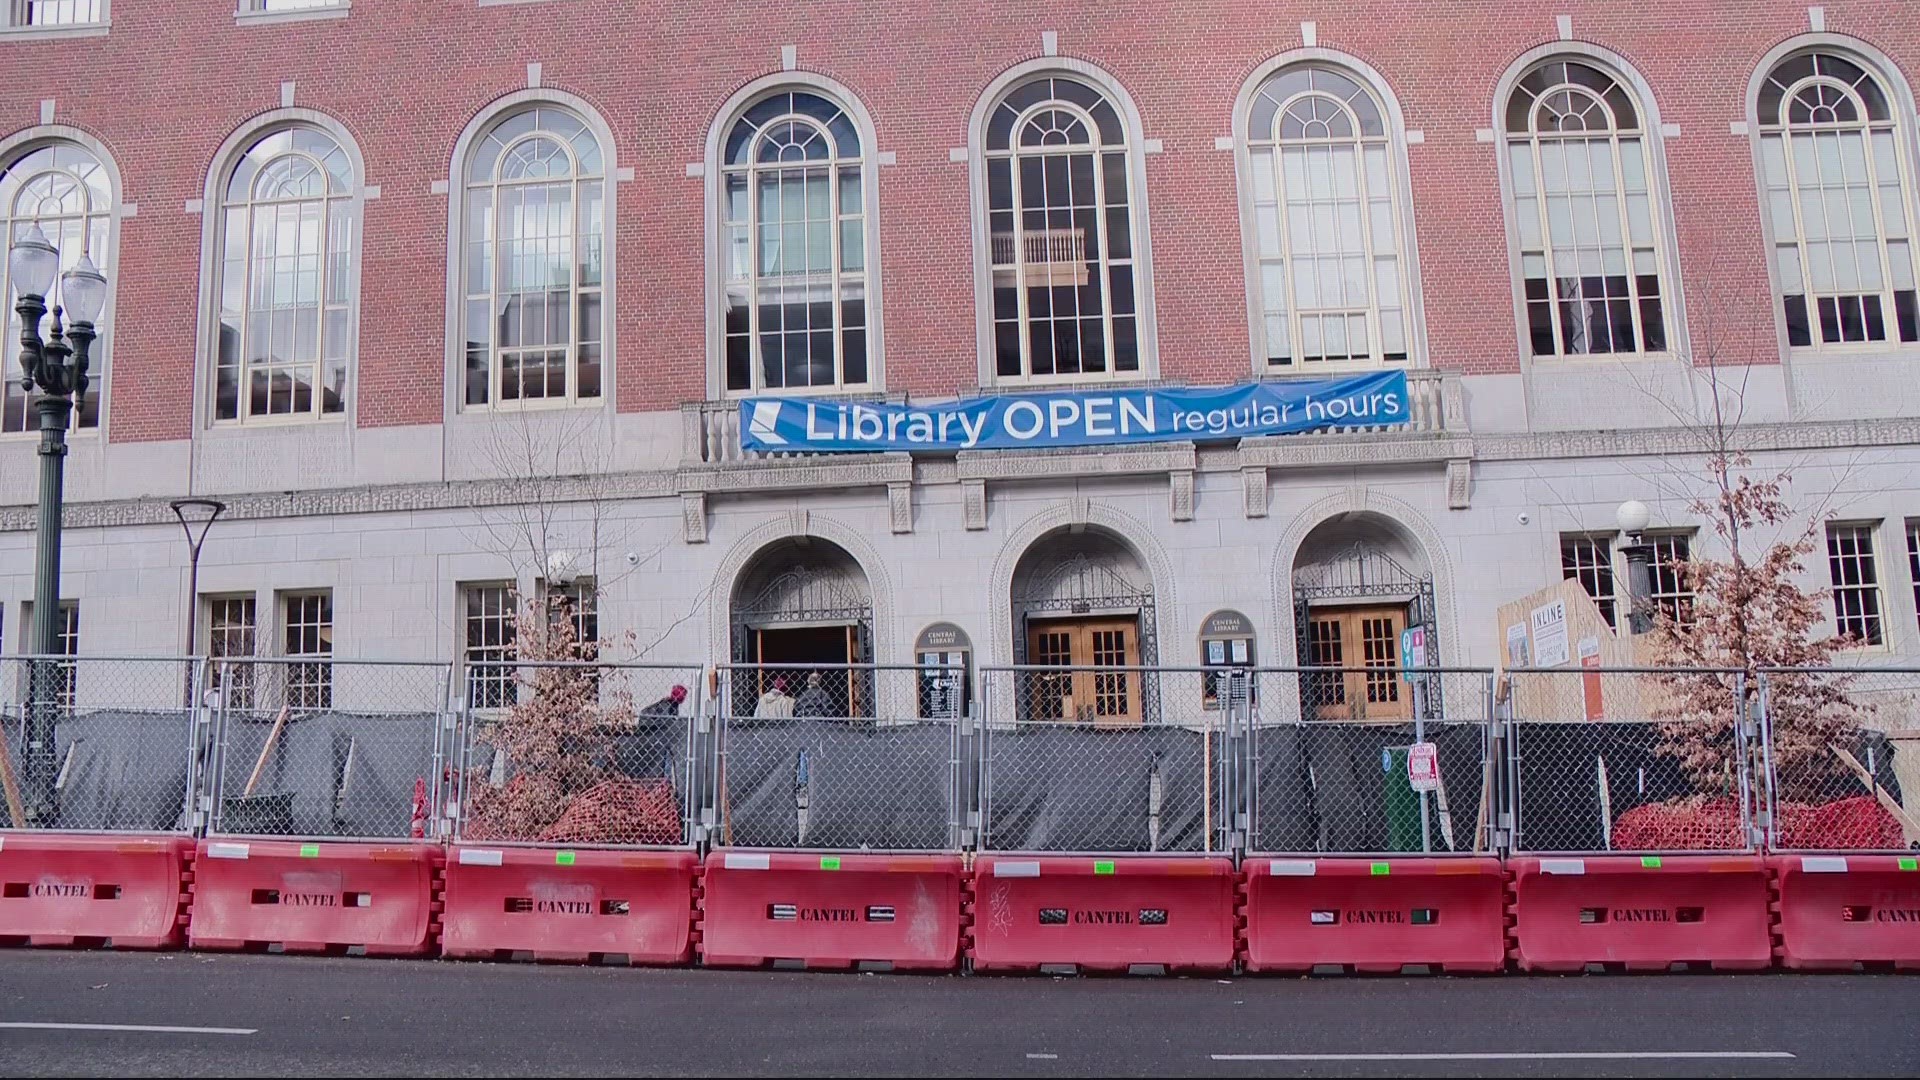 Many Multnomah county projects, backed by hundreds of millions of dollars in funding, are starting. Several libraries will close during the projects.